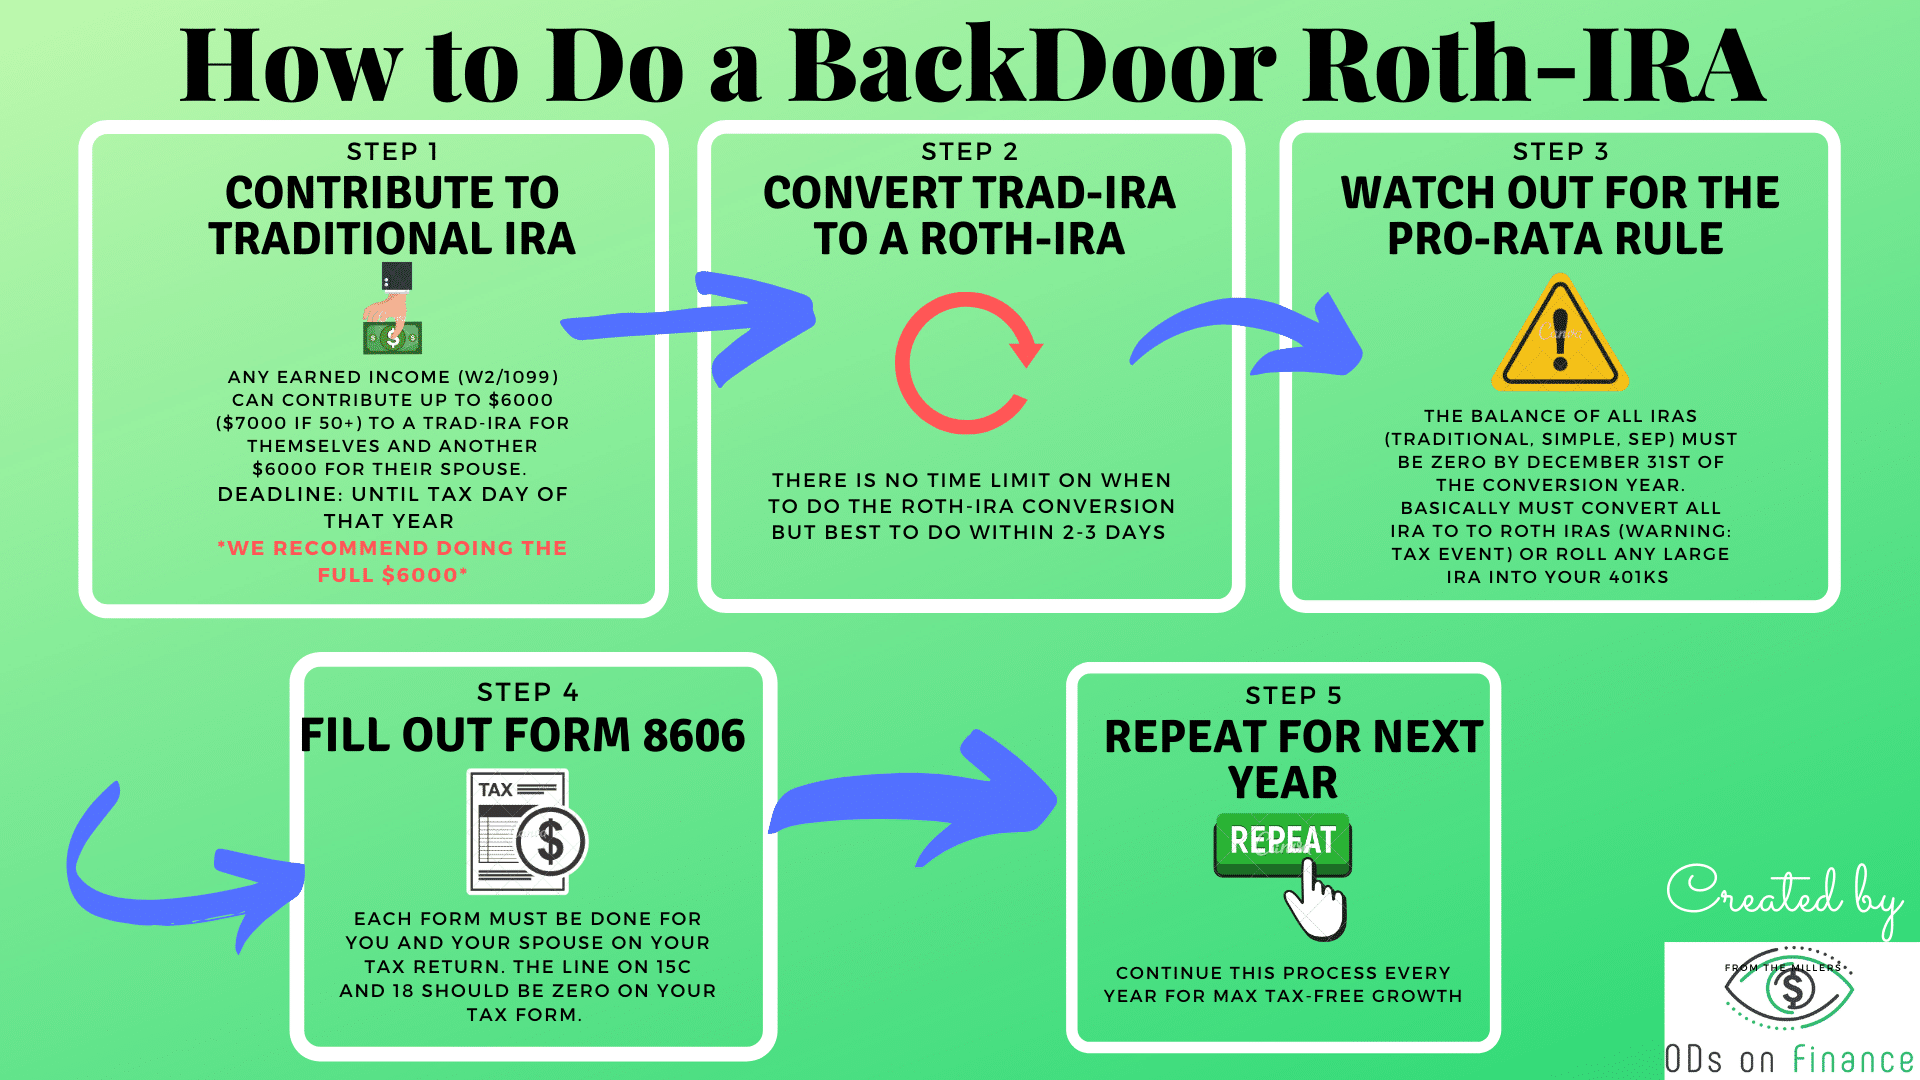 How to do BackDoor Roth IRA ODs on Finance